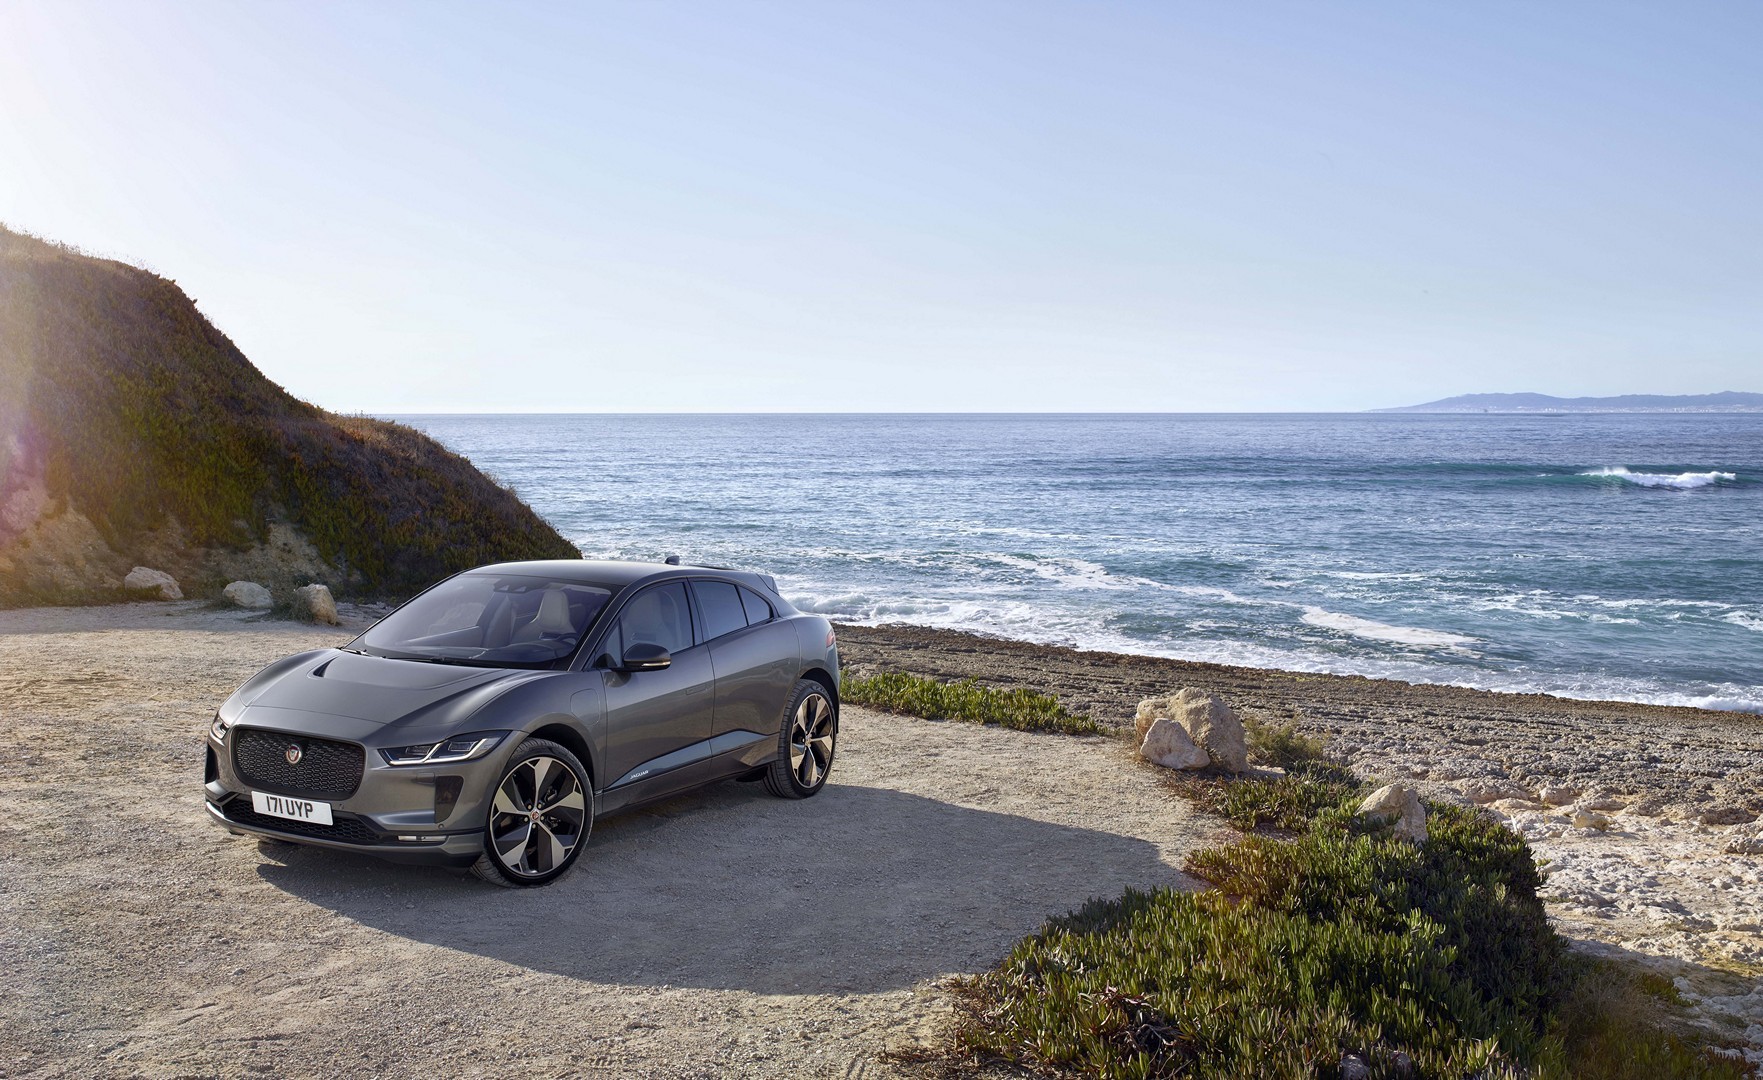 https://s1.cdn.autoevolution.com/images/news/gallery/2020-jaguar-i-pace-update-offers-234-miles-of-range-thanks-to-etrophy-know-how_35.jpg